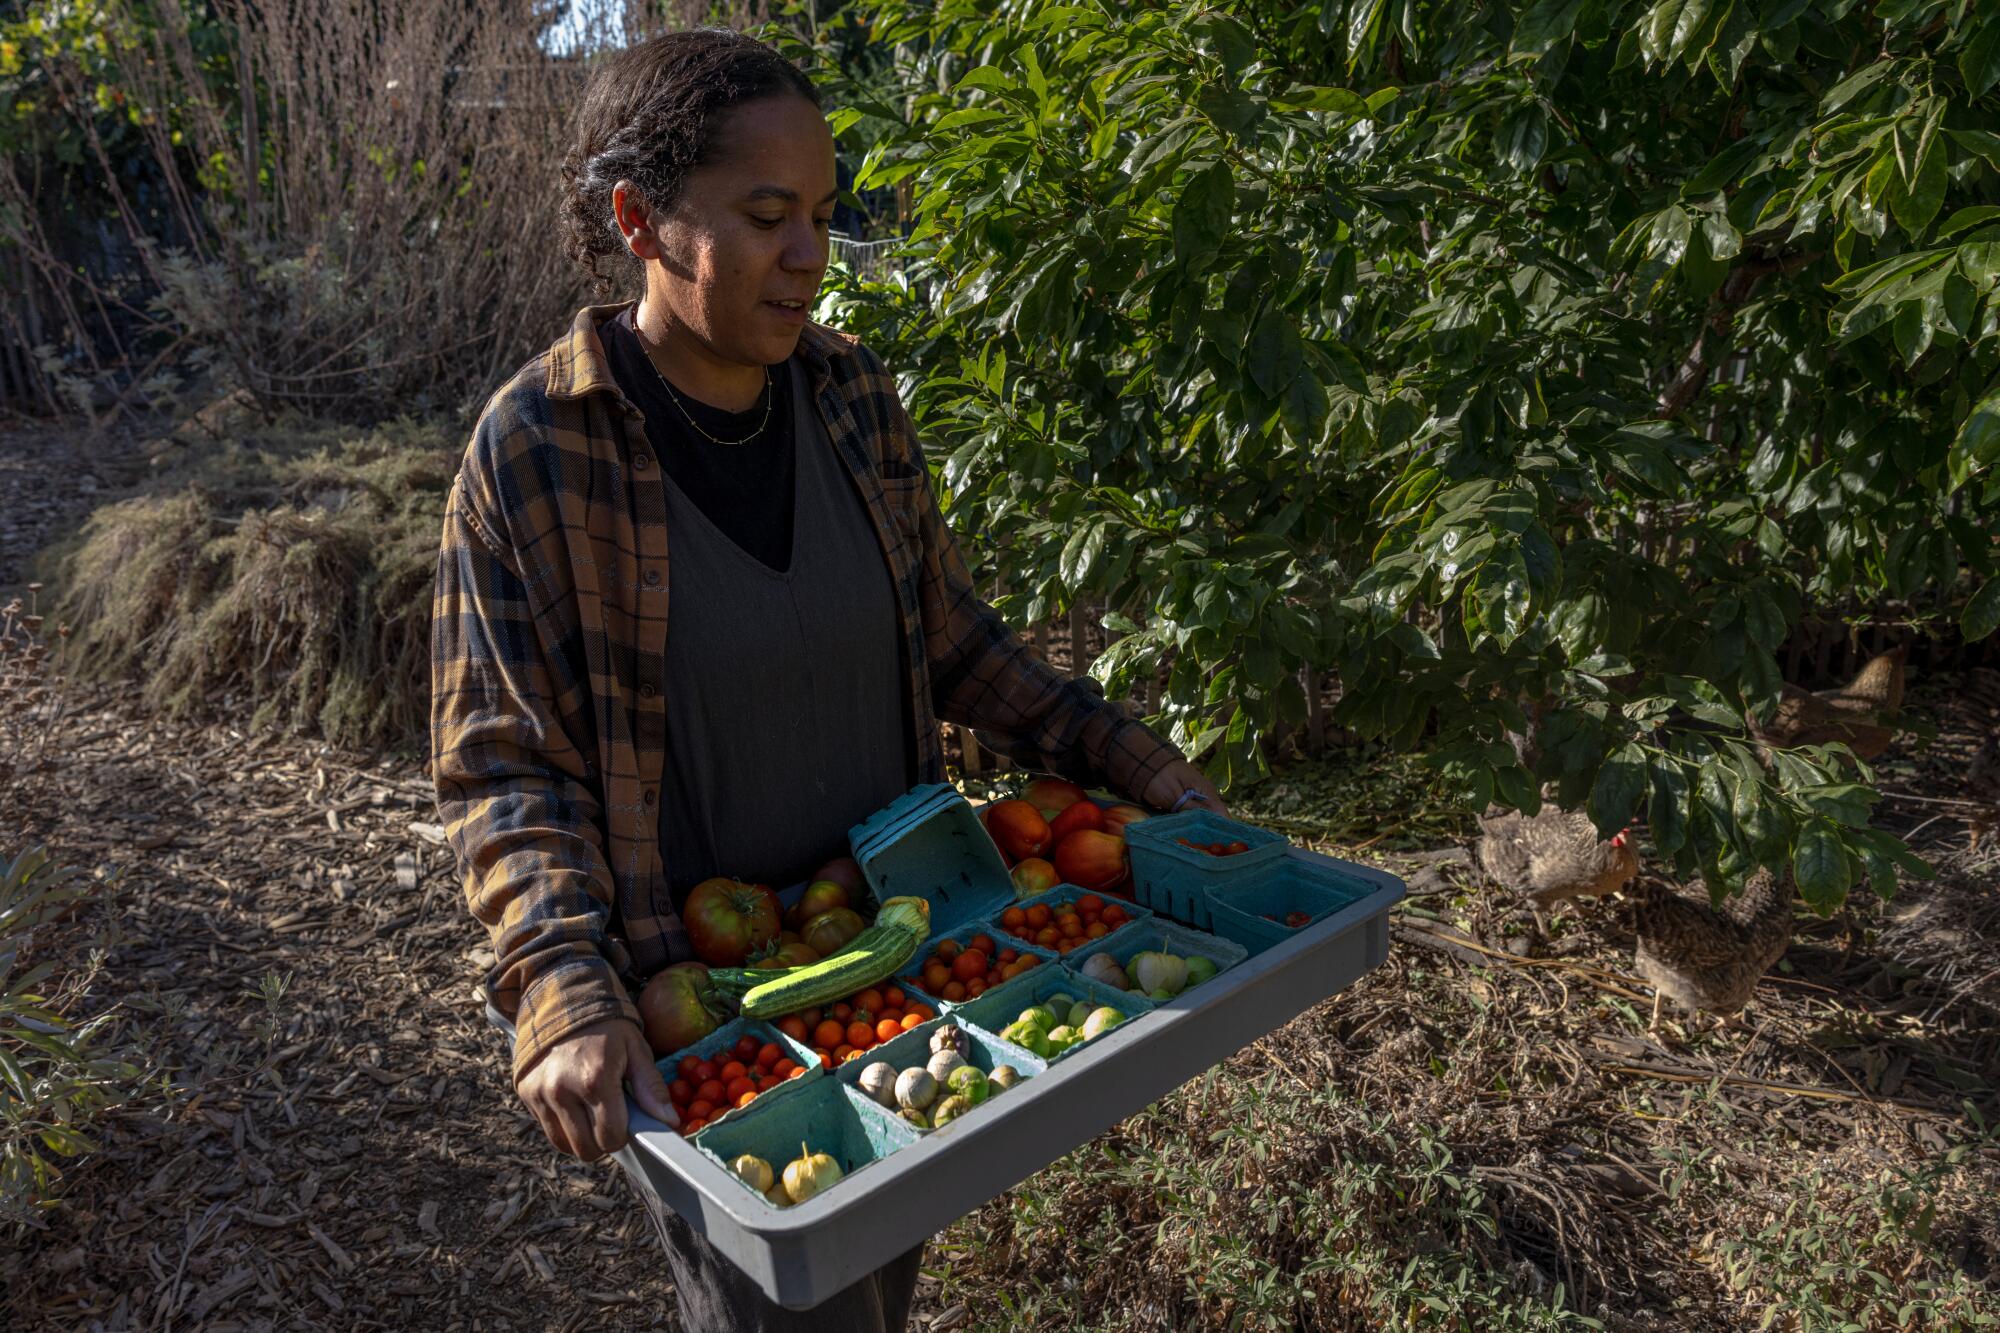 Alexys Romo, founder of Black Thumb, who uses compost from LA Compost, picks fresh vegetables and fruits.